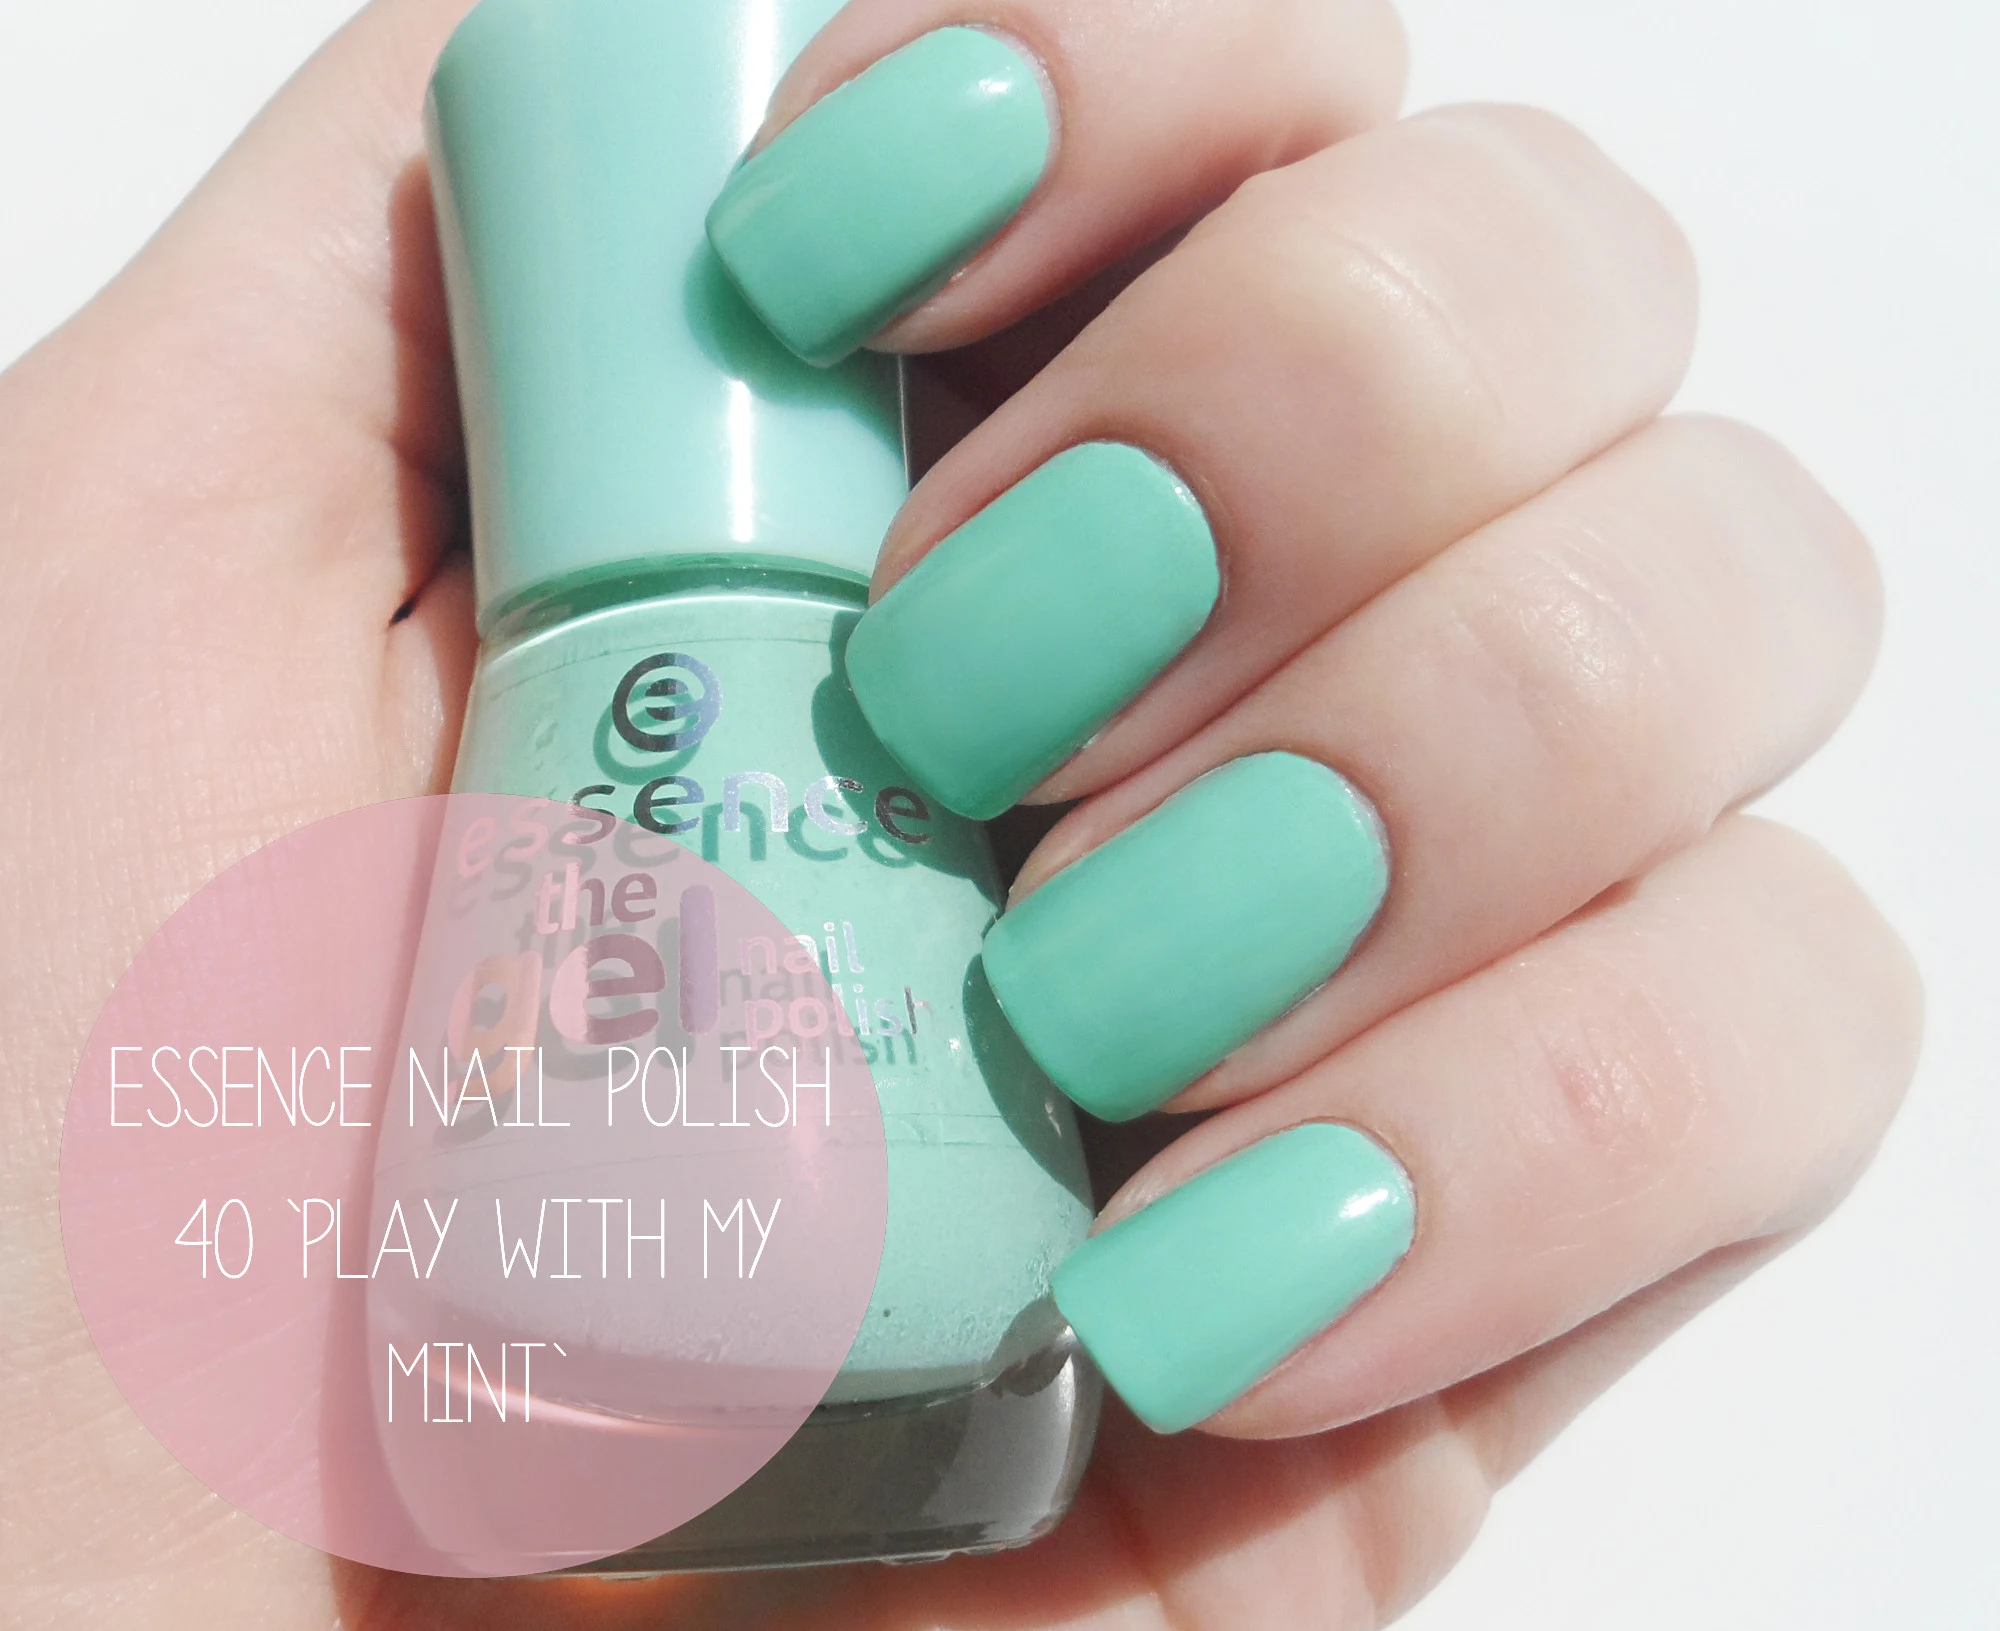 blogger Liz Breygel shares her beauty review and shows the pastel green spring nail look you can create with the nail polish by affordable european brand essence